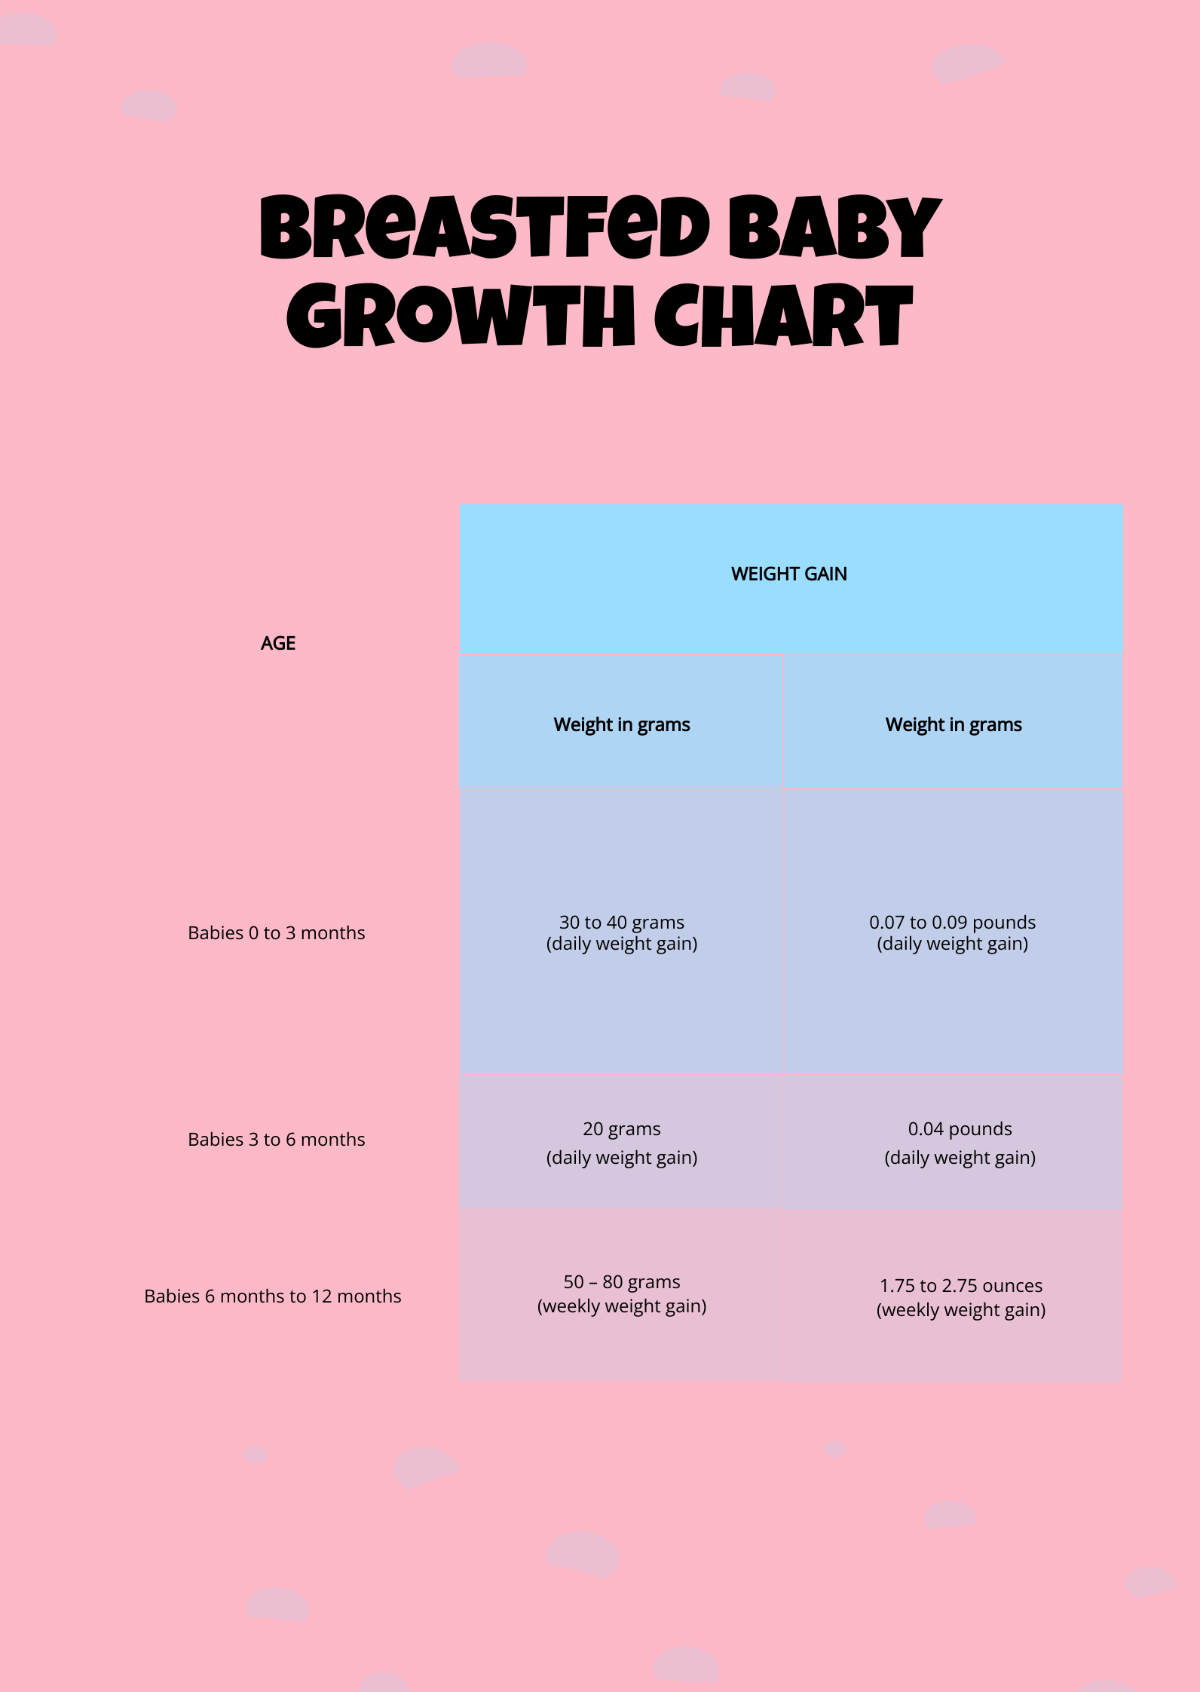 Breastfed Baby Growth Chart